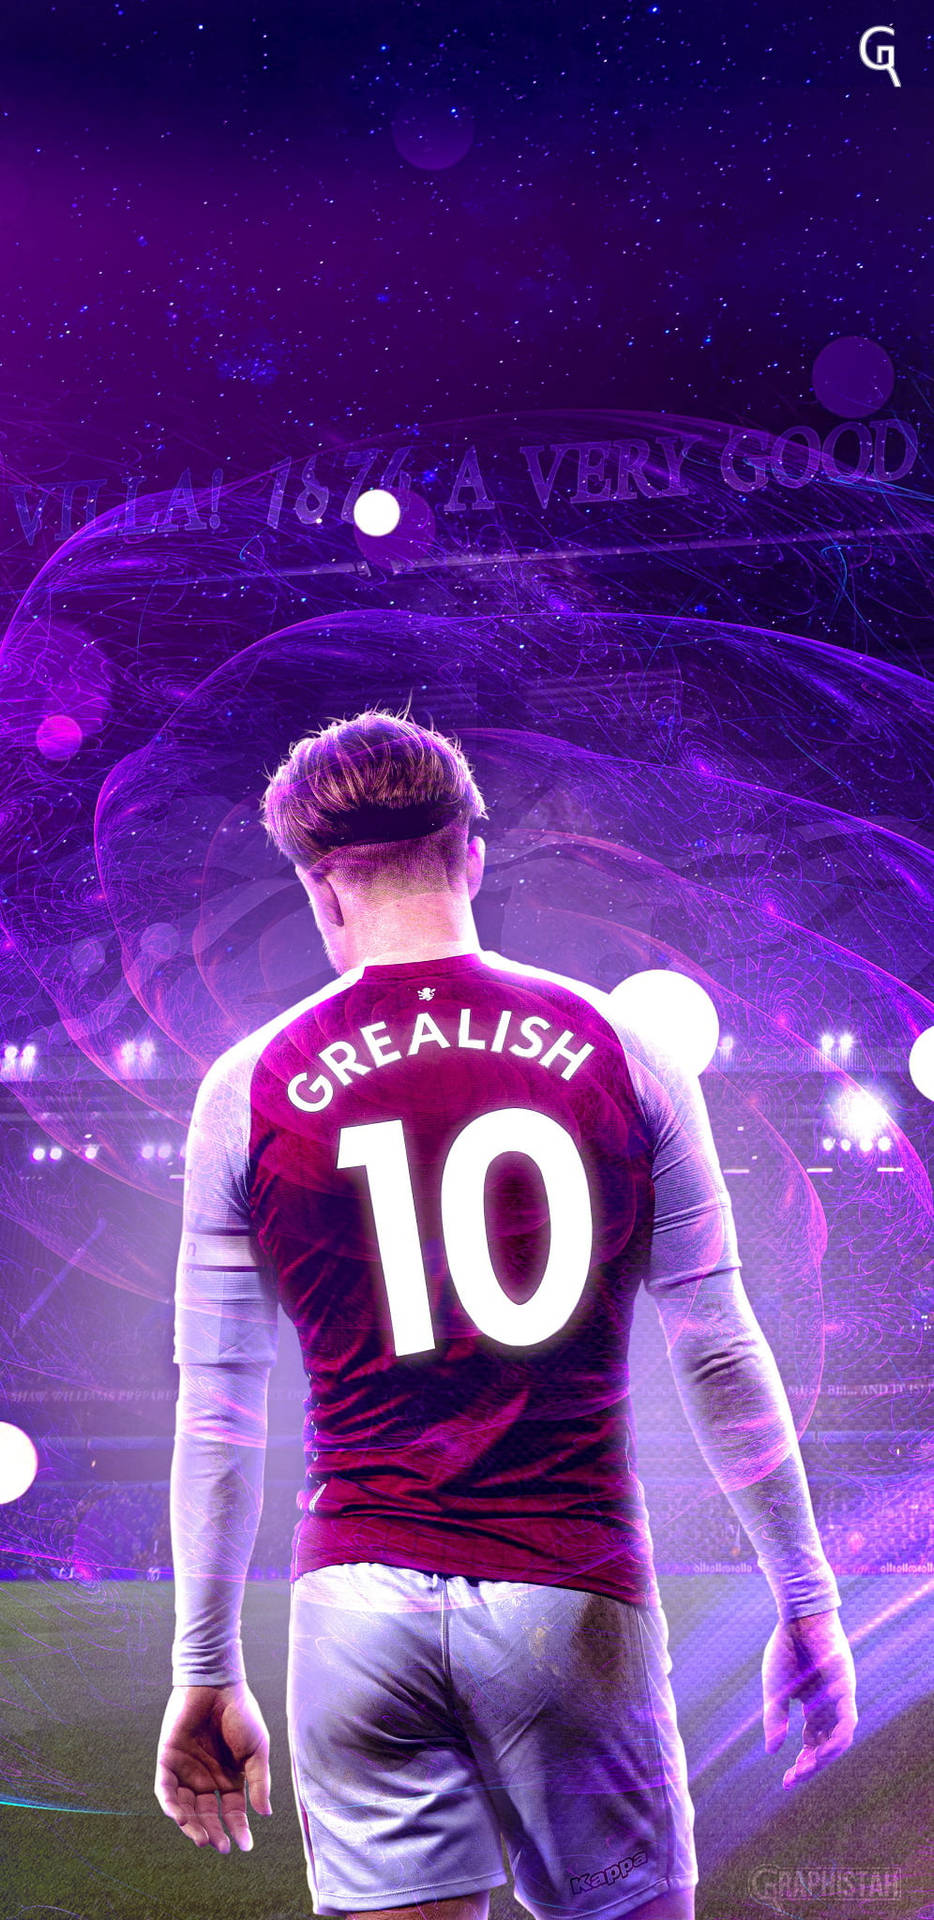 Jackgrealish 10 Jersey Can Be Translated To Spanish As 